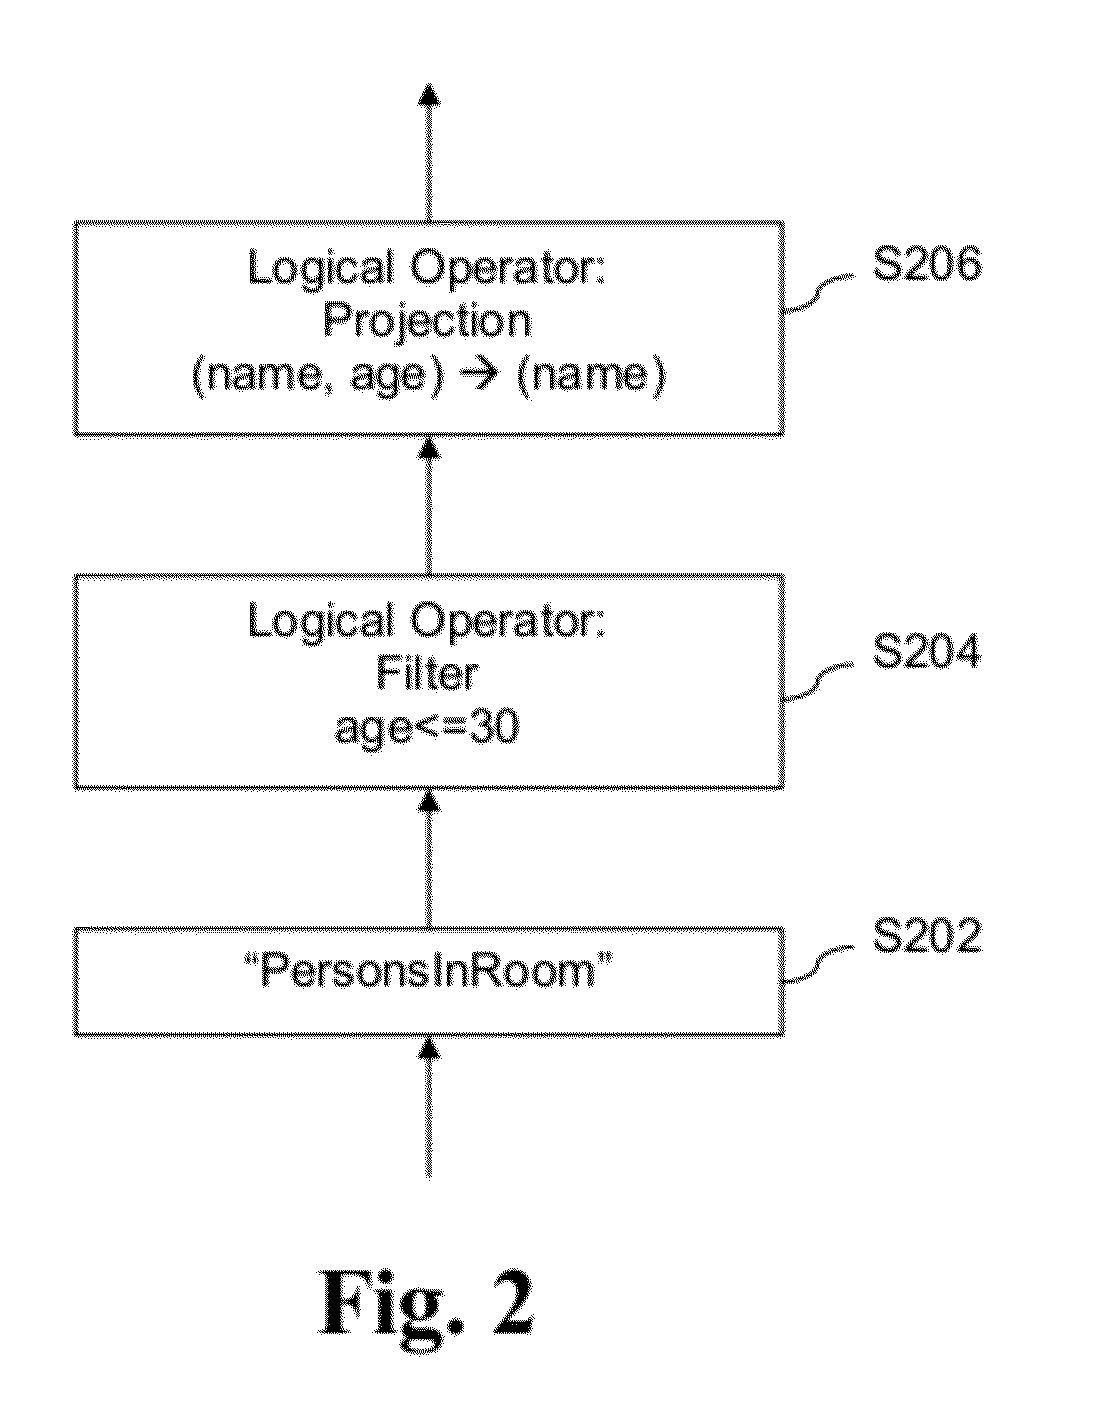 Systems and/or methods for user feedback driven dynamic query rewriting in complex event processing environments